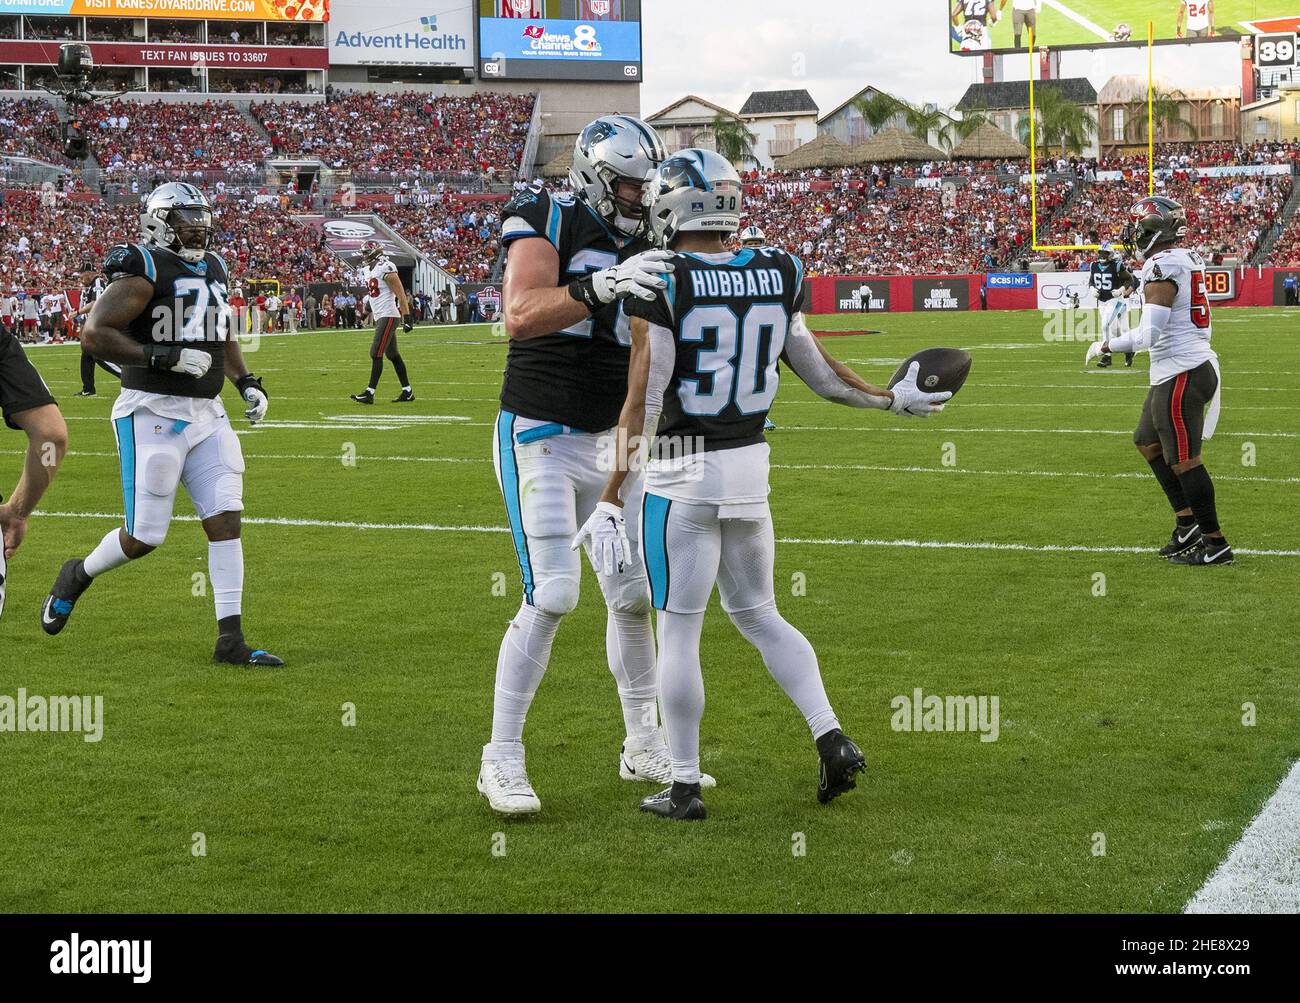 Tampa, United States. 09th Jan, 2022. Carolina Panthers' Trent Scott (78) and Brady Christensen (C) congratulate Chubba Hubbard (30) after his touchdown during the first half against the Tampa Bay Buccaneers at Raymond James Stadium in Tampa, Florida on Sunday, January 9, 2022. Photo by Steve Nesius/UPI Credit: UPI/Alamy Live News Stock Photo